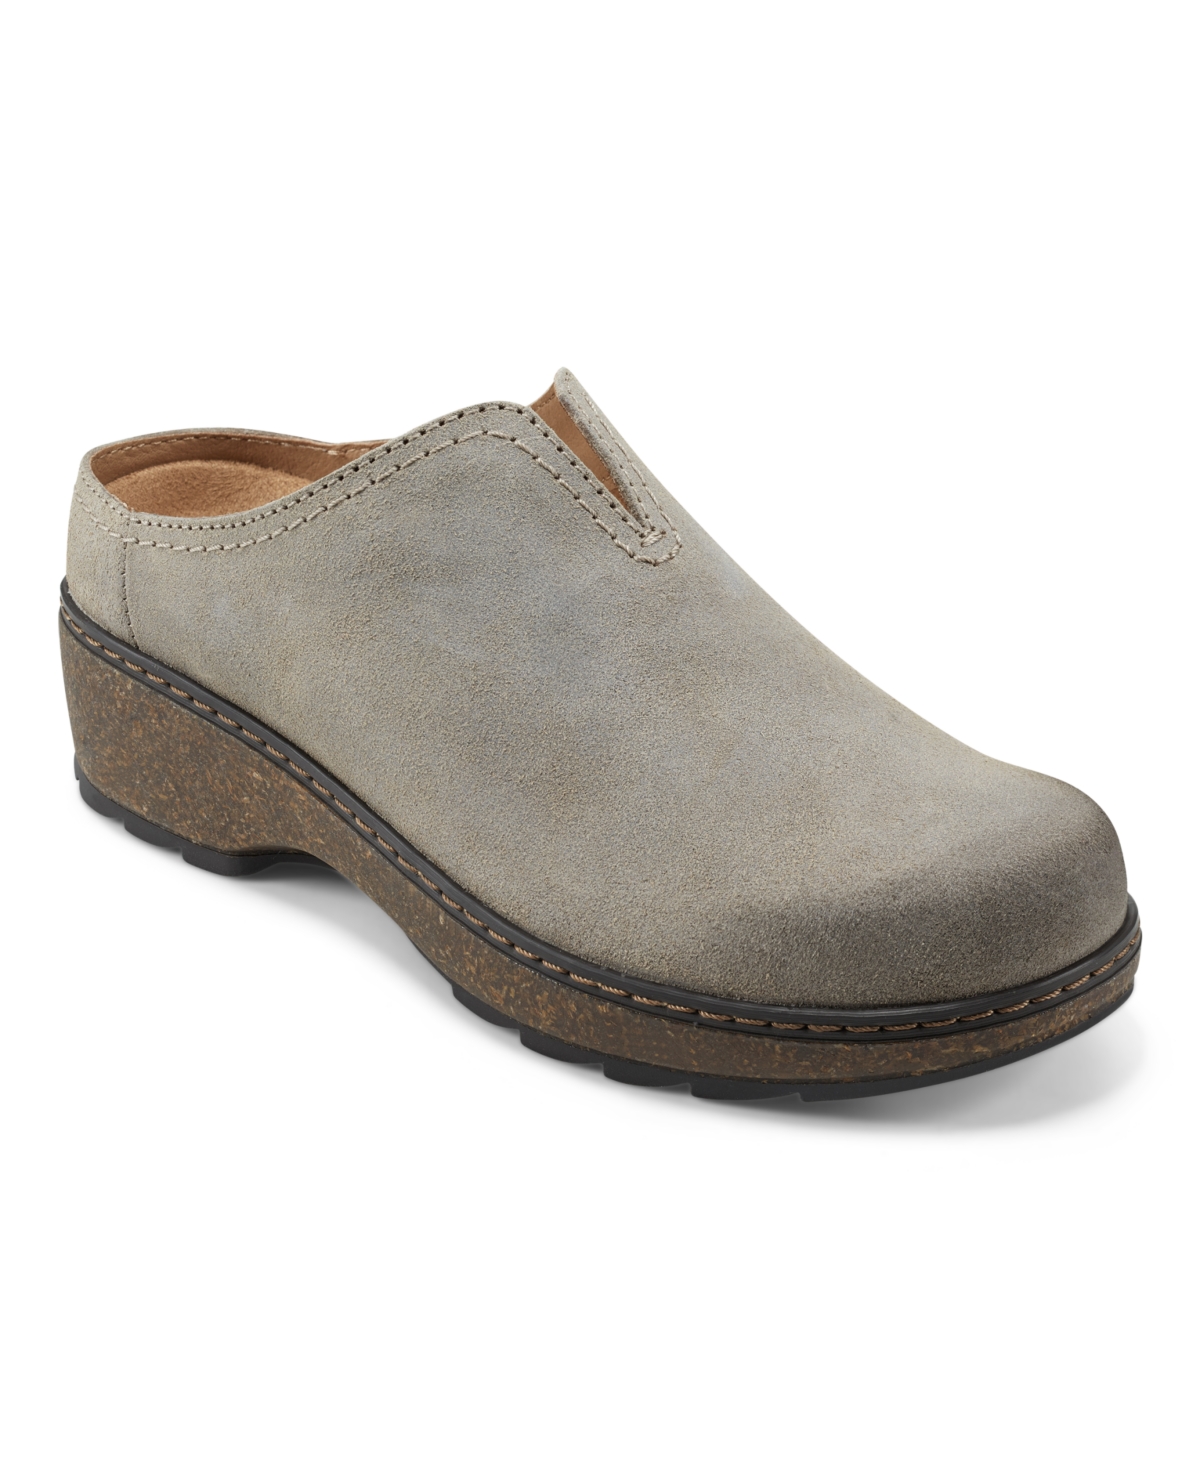 Earth Women's Kolia Round Toe Slip-on Casual Heeled Mules In Taupe Suede